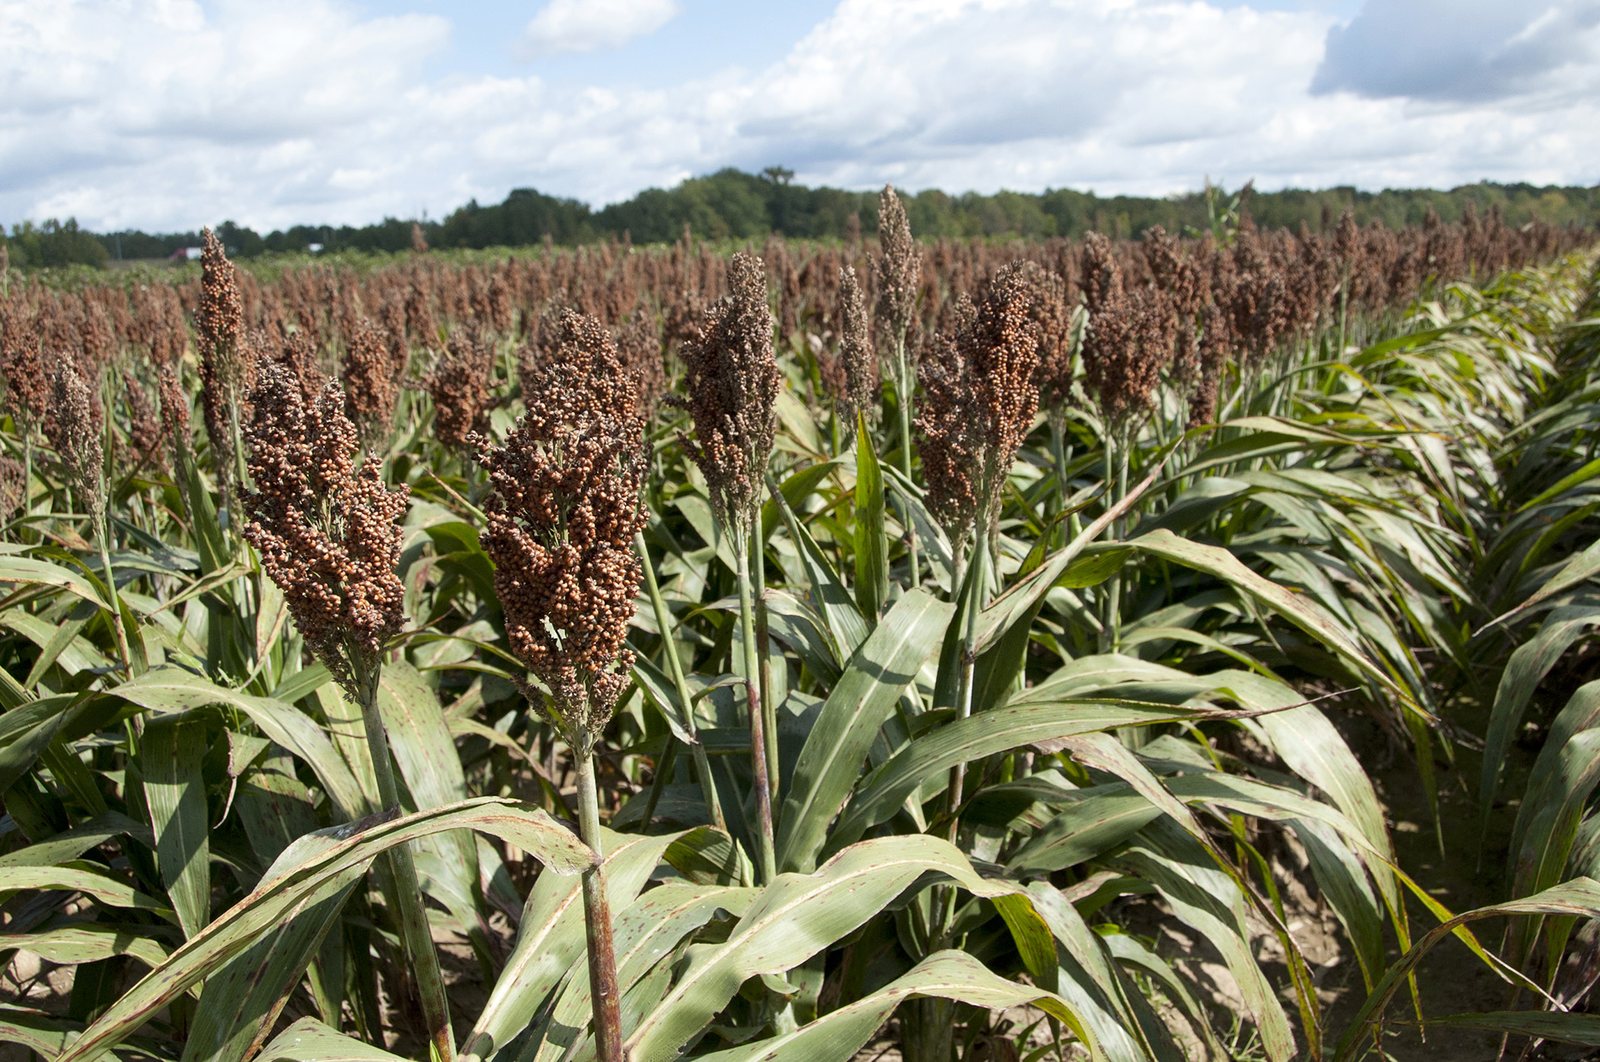 Low tannin sorghum has potential for poultry feed